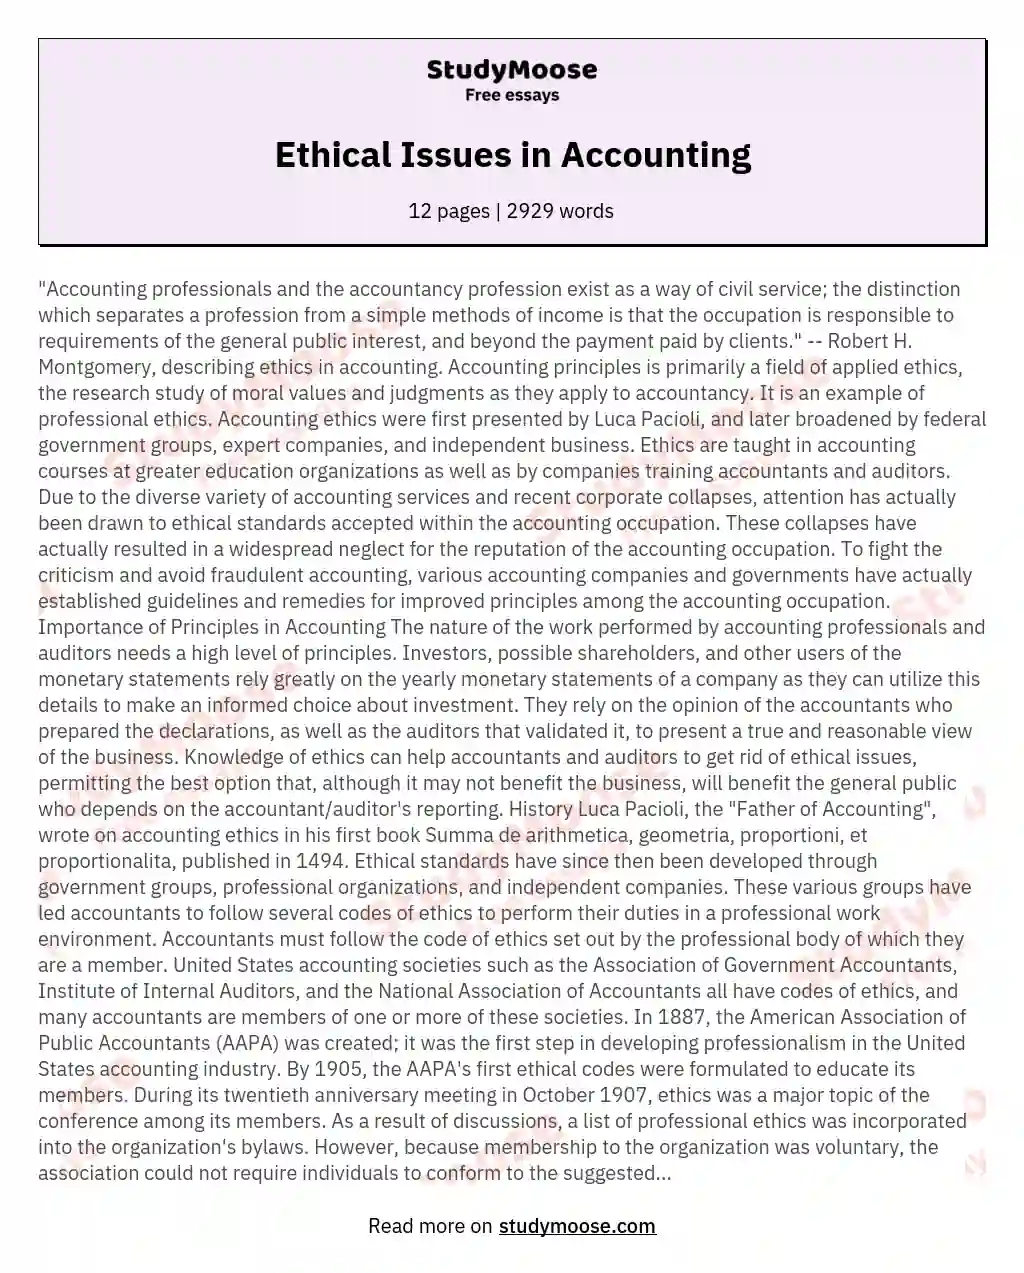 Ethical Issues in Accounting essay